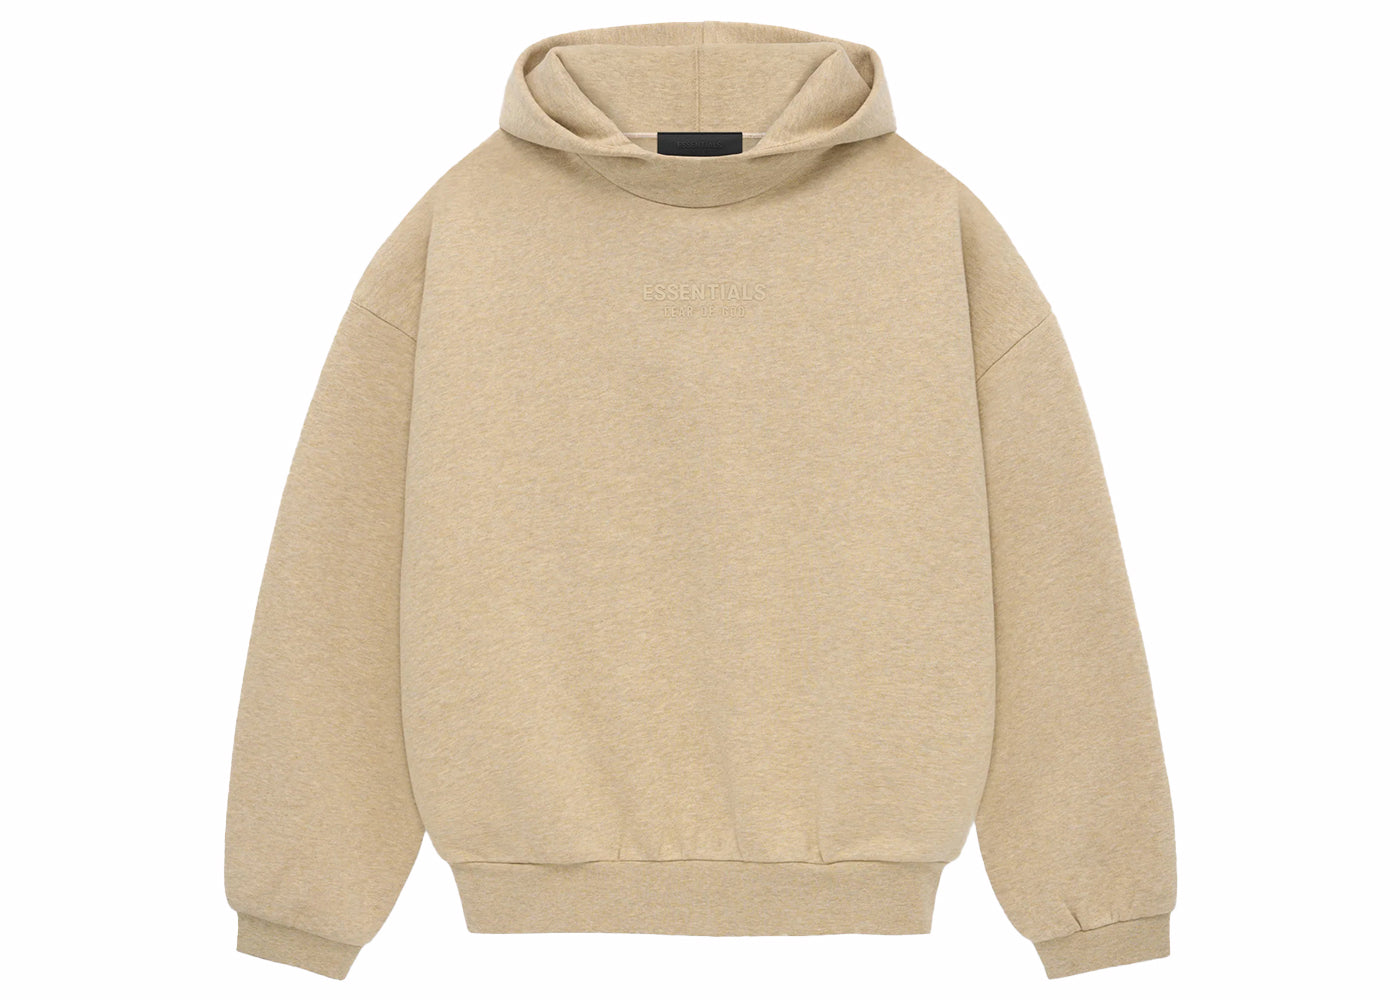 FEAR OF GOD ESSENTIALS HOODIE GOLD HEATHER